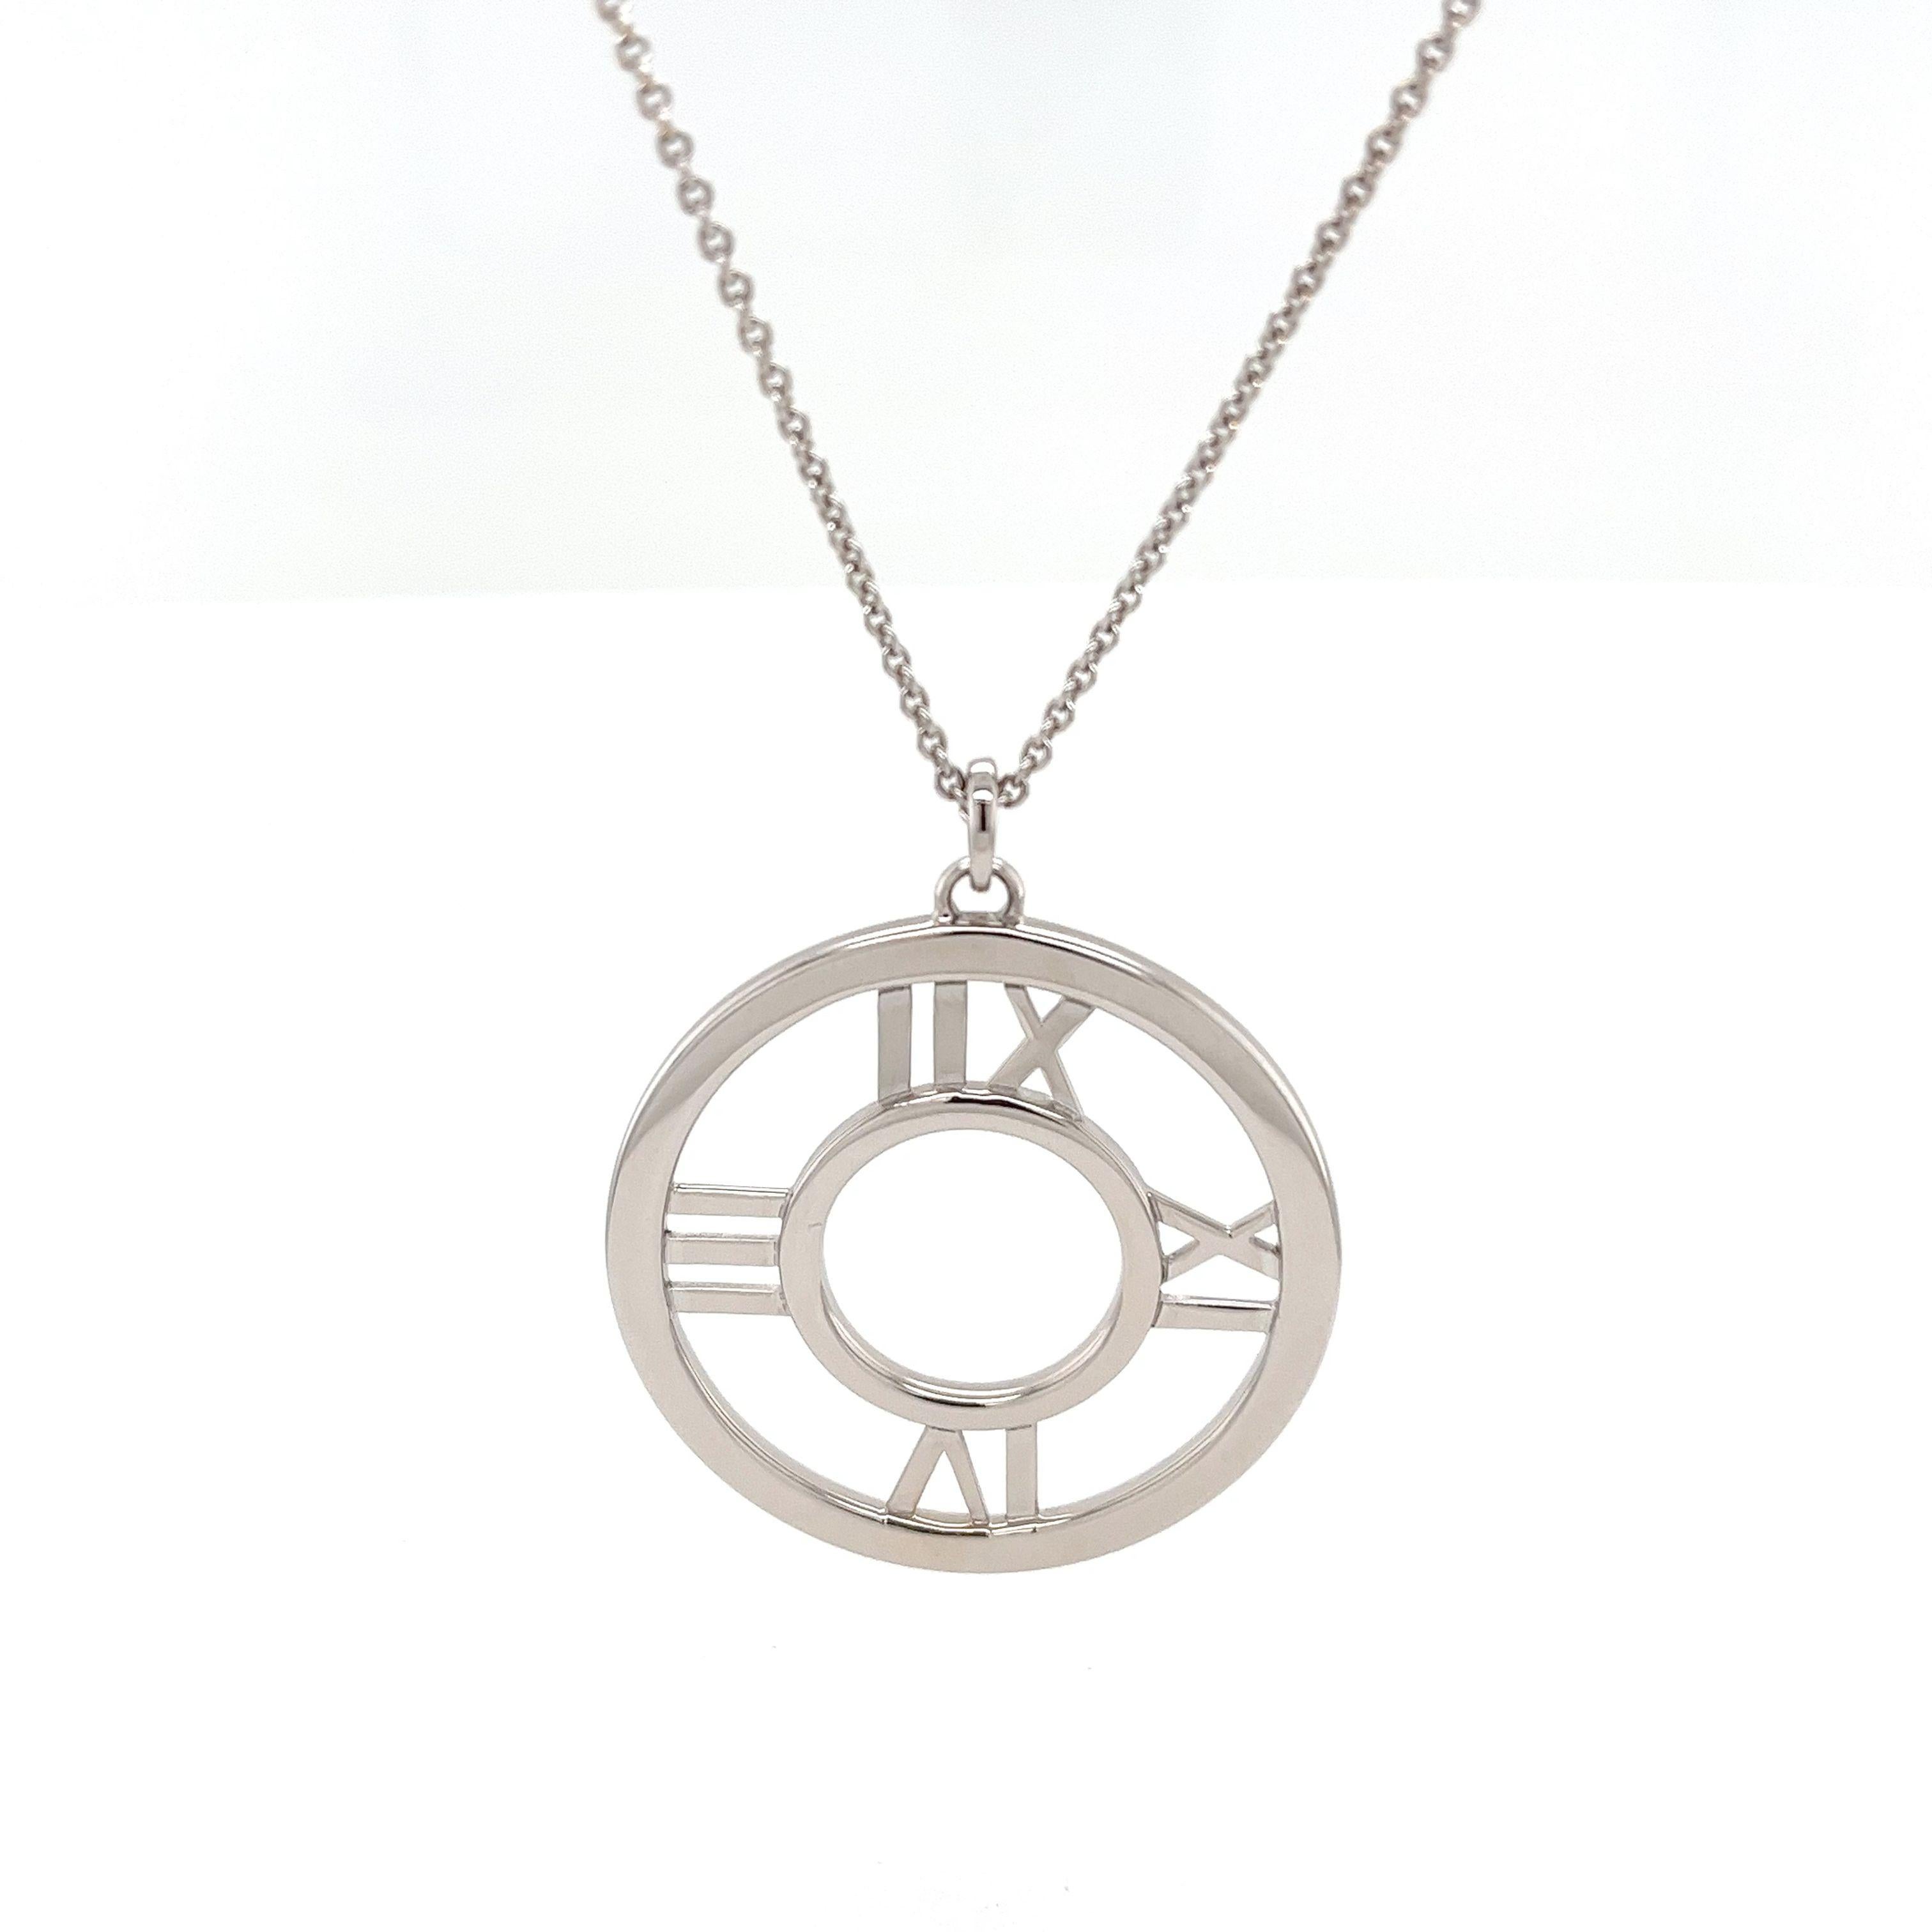 This Tiffany & Co. 18ct white gold circle pendant offers an understated yet chic accessory option that makes a statement without saying a word.  It's the ideal present for someone special or as a treat for yourself.

•	Total  Weight: